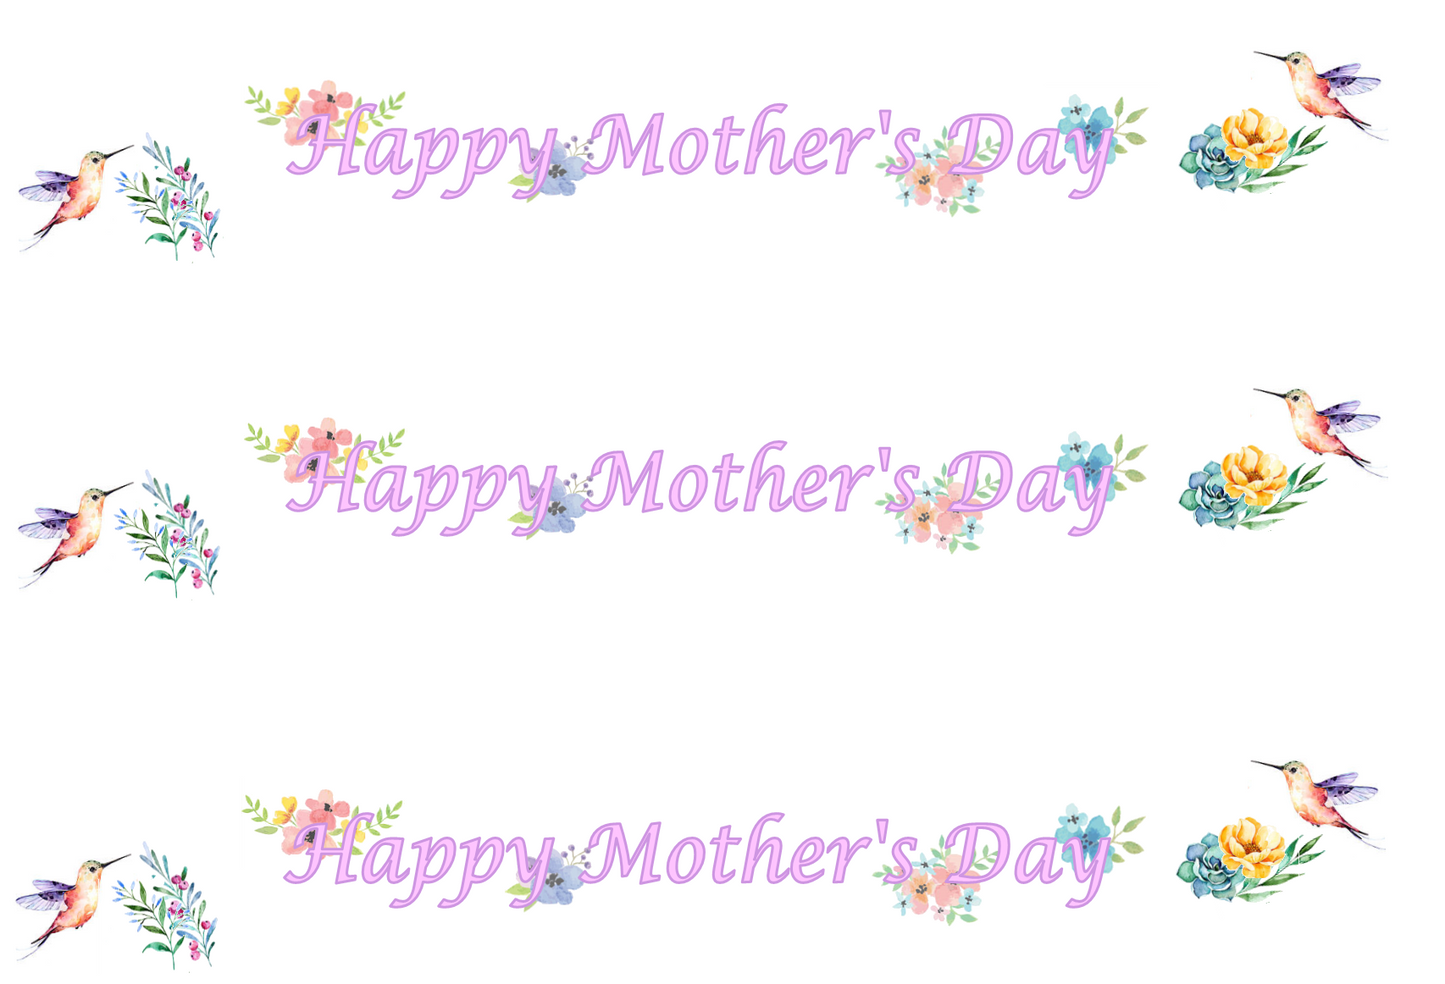 Happy Mother's Day Hummingbirds Edible Icing Cake Ribbon / Side Strips